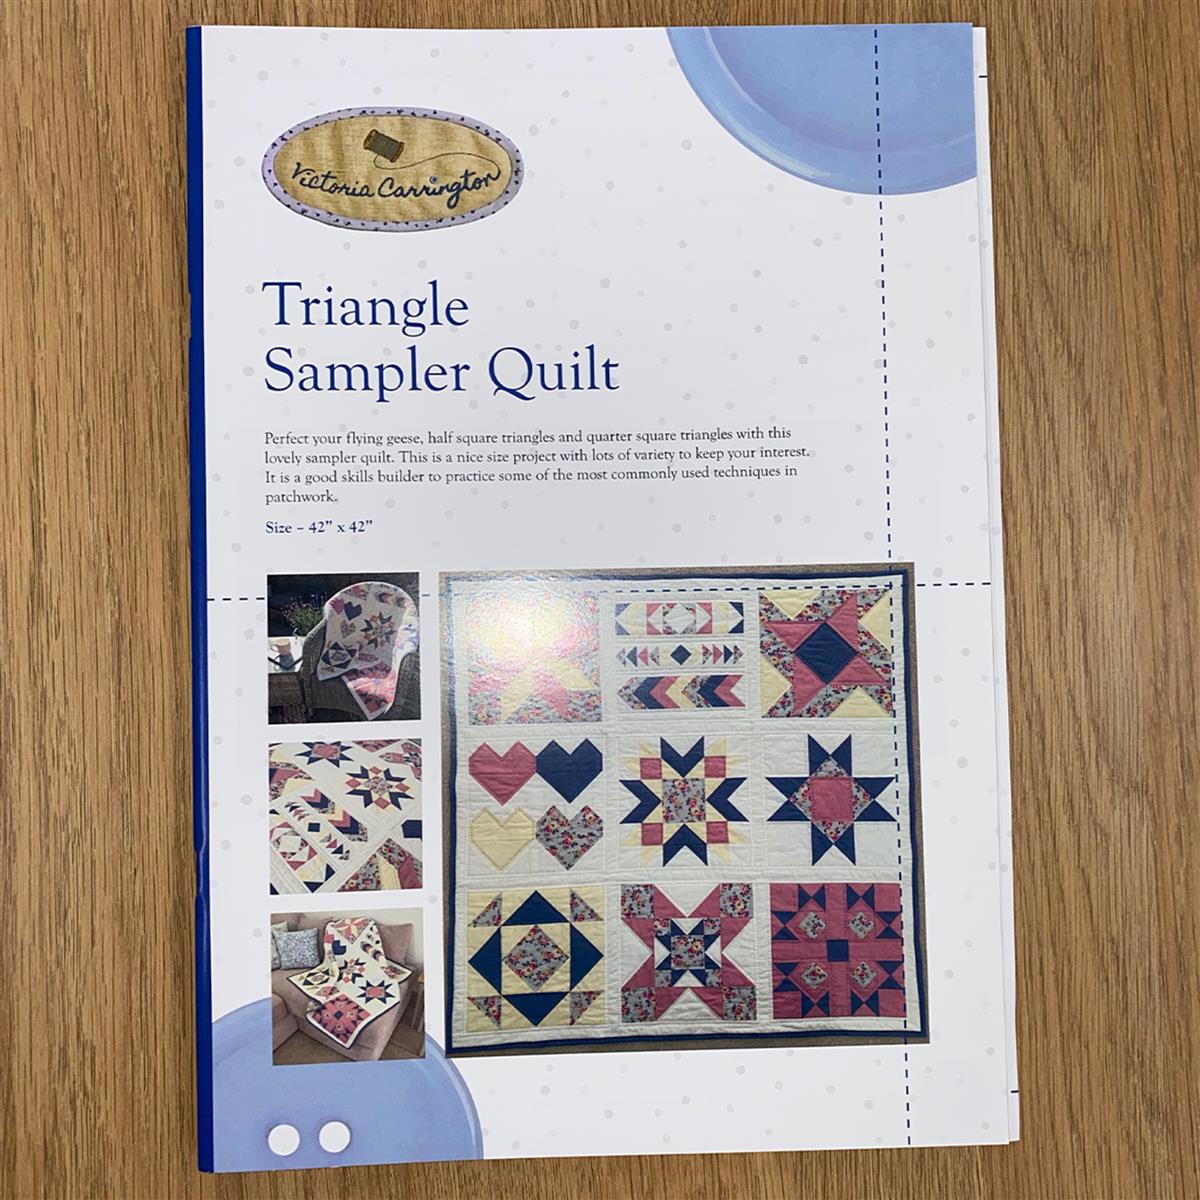 Victoria Carrington's Triangle Sampler Quilt Instructions | SewingStreet